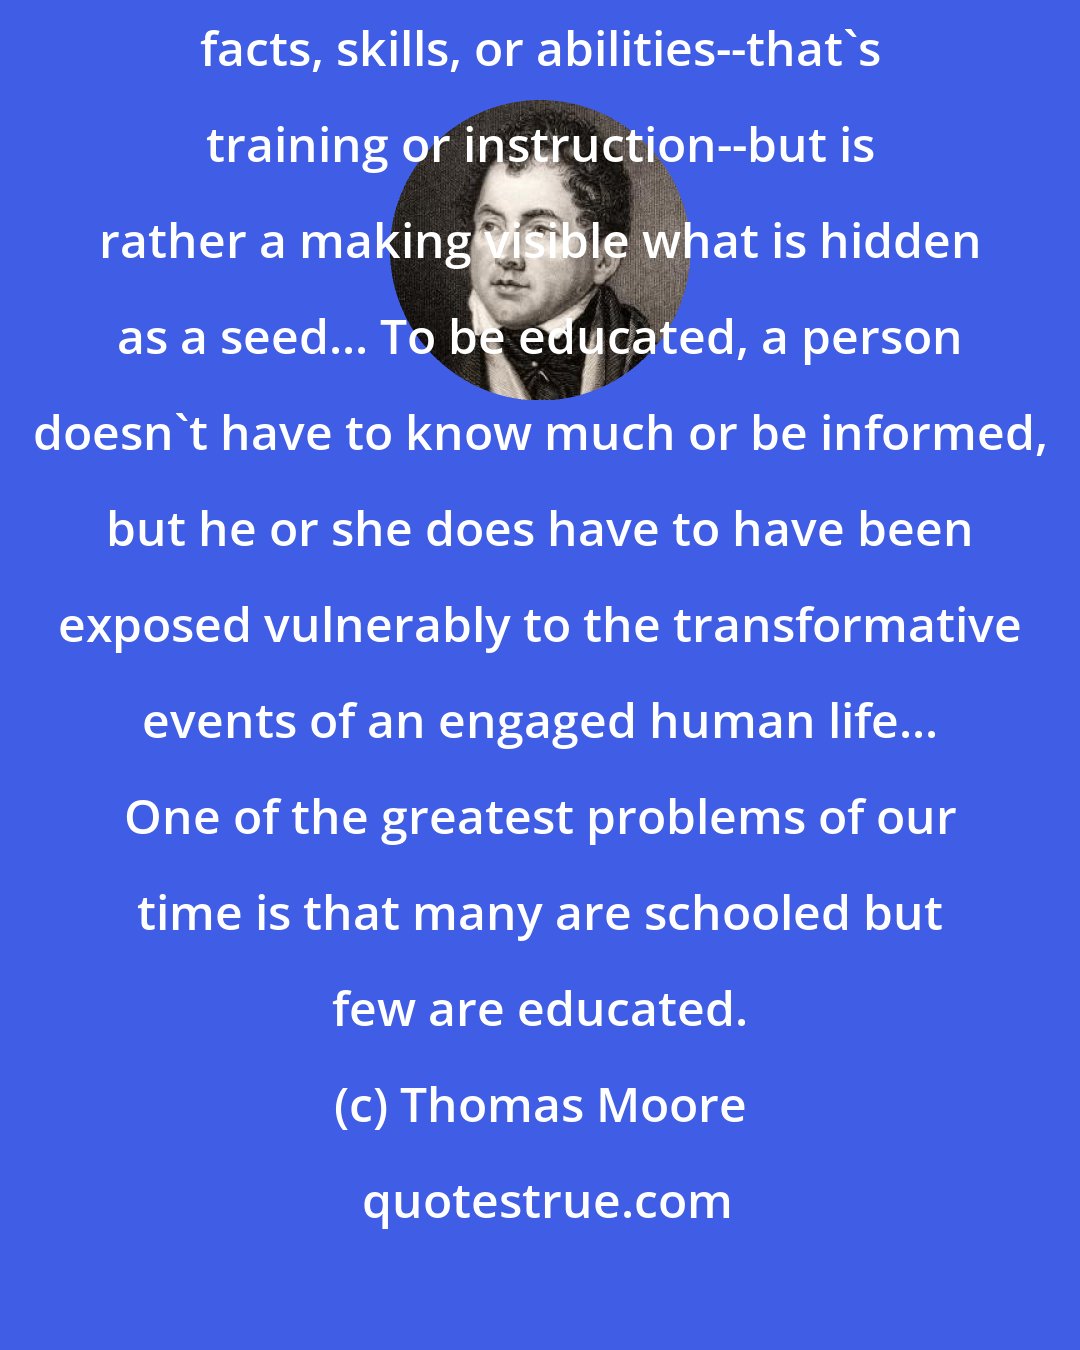 Thomas Moore: Education is not the piling on of learning, information, data, facts, skills, or abilities--that's training or instruction--but is rather a making visible what is hidden as a seed... To be educated, a person doesn't have to know much or be informed, but he or she does have to have been exposed vulnerably to the transformative events of an engaged human life... One of the greatest problems of our time is that many are schooled but few are educated.